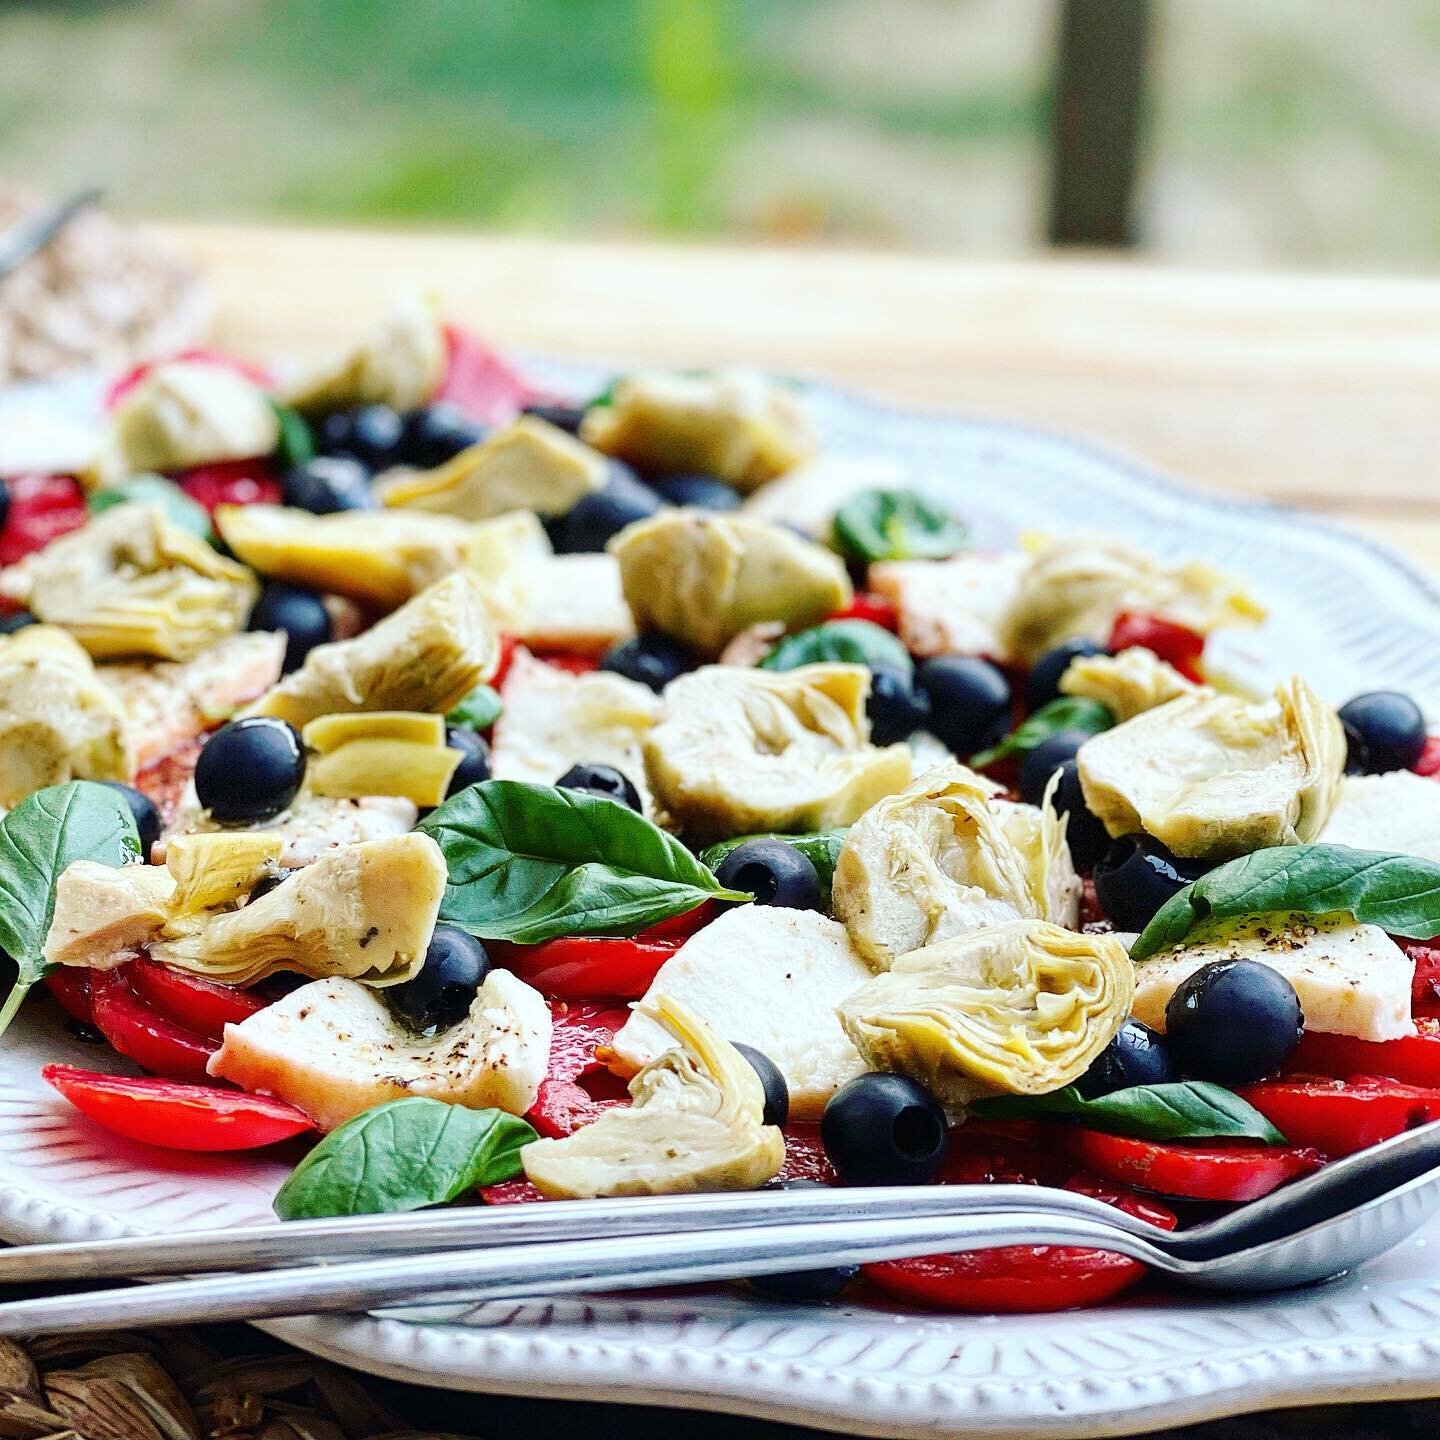 What to eat for dinner during a heat wave 
🥵 

San Marzano tomatoes, artichoke halves, black olives, mozzarella, fresh basil and our Berry Olive dressing.

Stay cool, be safe, check on your neighbors.
.
.
.

#dinner #vegetarian #italianfood #articho